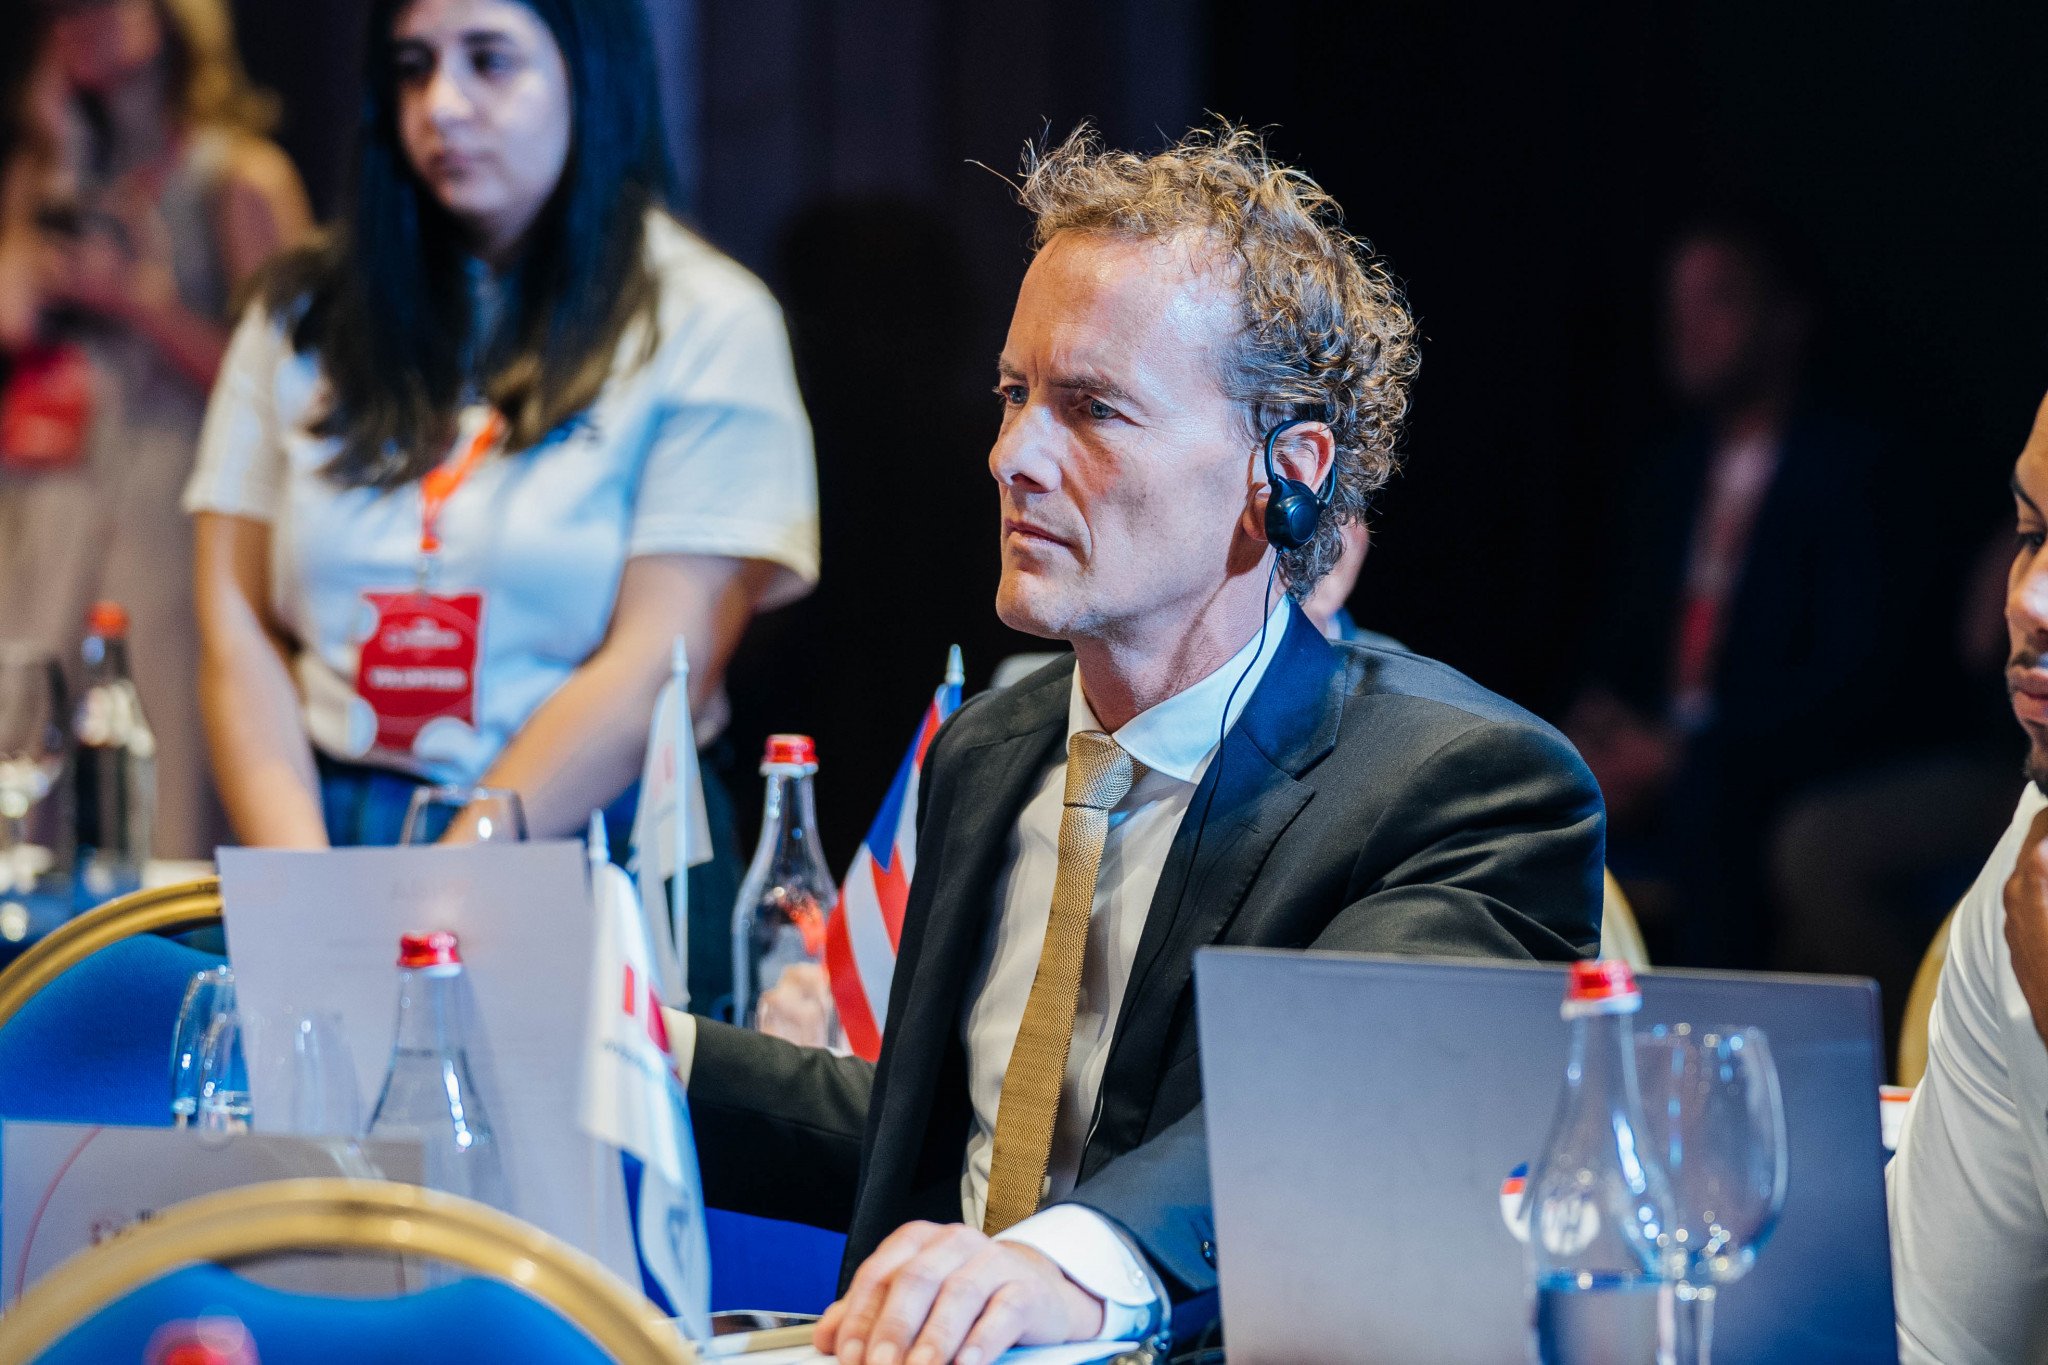 Boris van der Vorst did not have the opportunity to challenge Umar Kremlev for the IBA Presidency after the Extraordinary Congress voted against holding an election, prompting the Dutchman to leave the gathering ©IBA